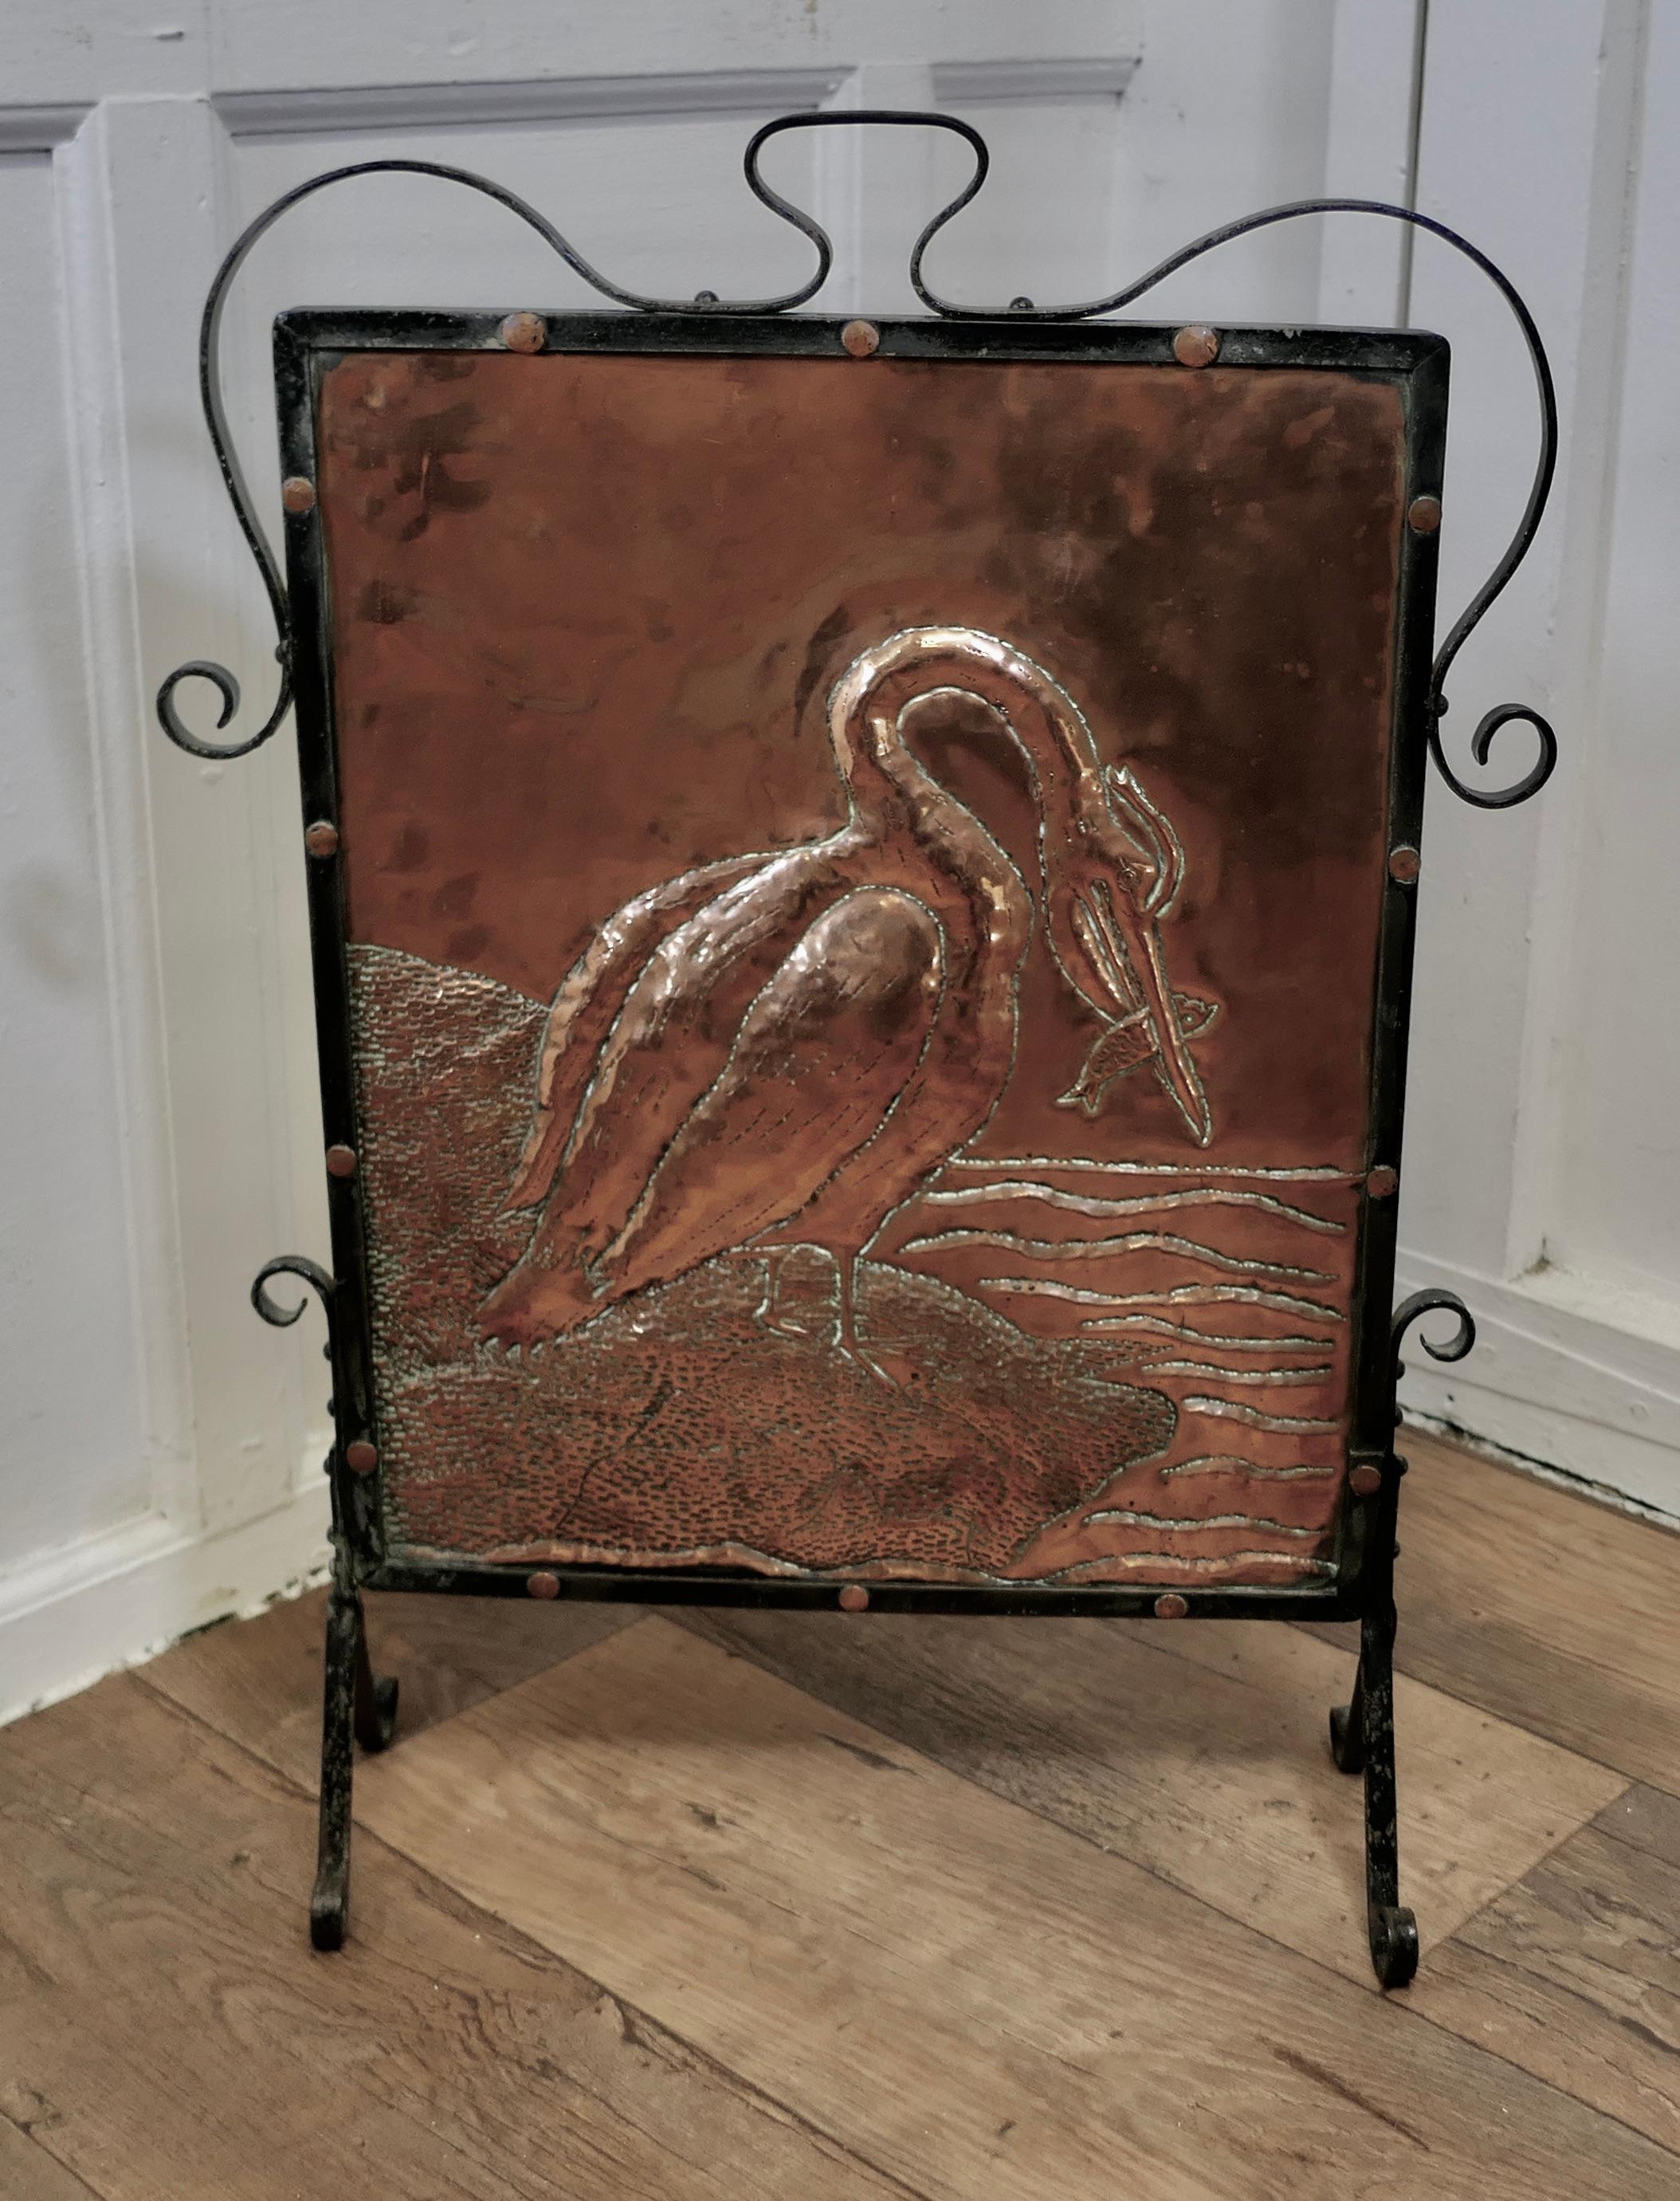 Arts and Crafts Stork and Fish Copper and Iron Fire Screen

This is a Classic in the Arts and Crafts Style, it is a hand beaten copper screen, which is mounted on very stylish wrought Iron feet which carry all the way to the top culminating with